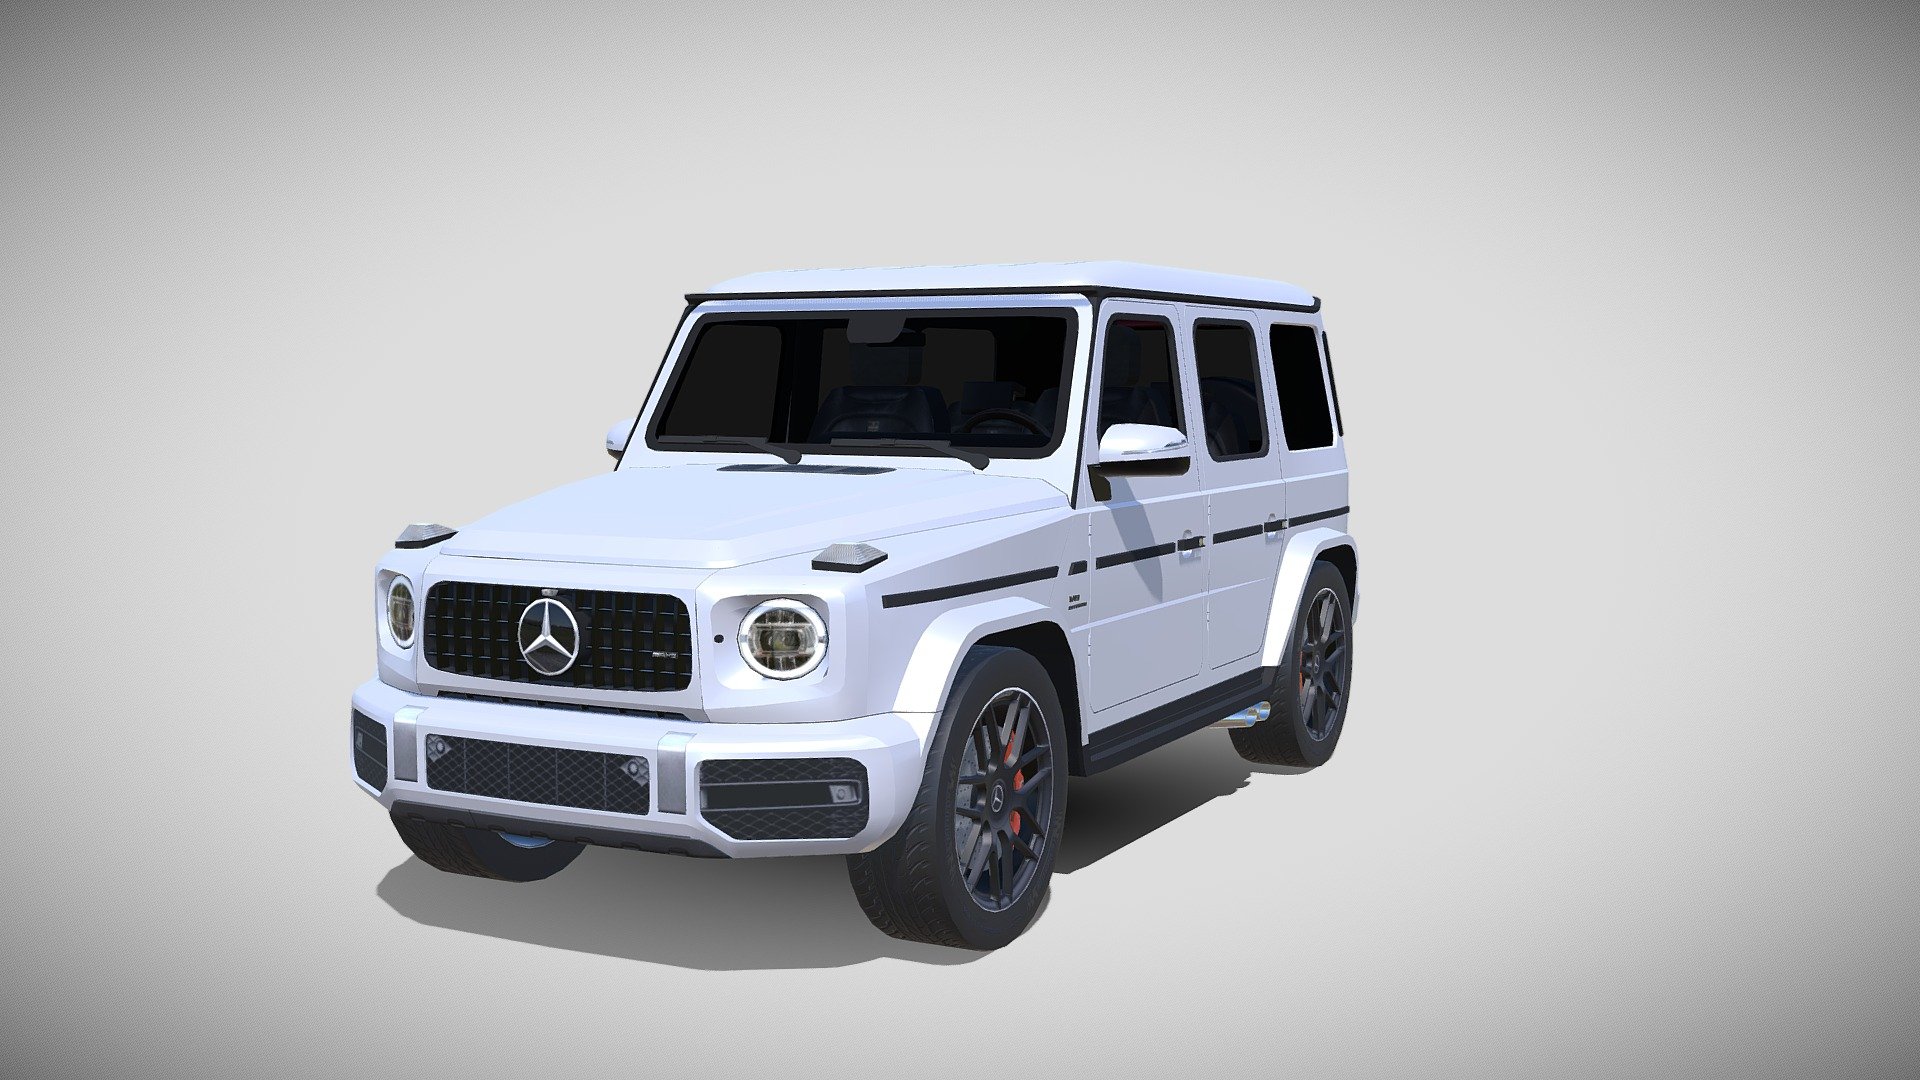 This is lowpoly model of Mercedes-Benz G63 AMG

Even with a low number of polygons the level of detail remains high.

Blender 2.9 materials. Photo textures.

You can easily change main color of the vehicle.

Model also includes lowpoly interior. Interior is only for better outside visual detail.




All parts have the correct name.

For body - G63.Body

For wheel - G63.Wheel.Ft.L

Ft.L means front left wheel.

For brake caliper - G63.Brake.Ft.L

With naming like that it will be easier to rigge, animate the model.




Vertices: 17,729

Edges: 33,908

Faces: 16,145

Triangles: 32,055

If you want to buy this model or my other models, you can find them on other platforms where my name is: PieEntertainment.
Or just write here in the comments.

HDR not included 3d model